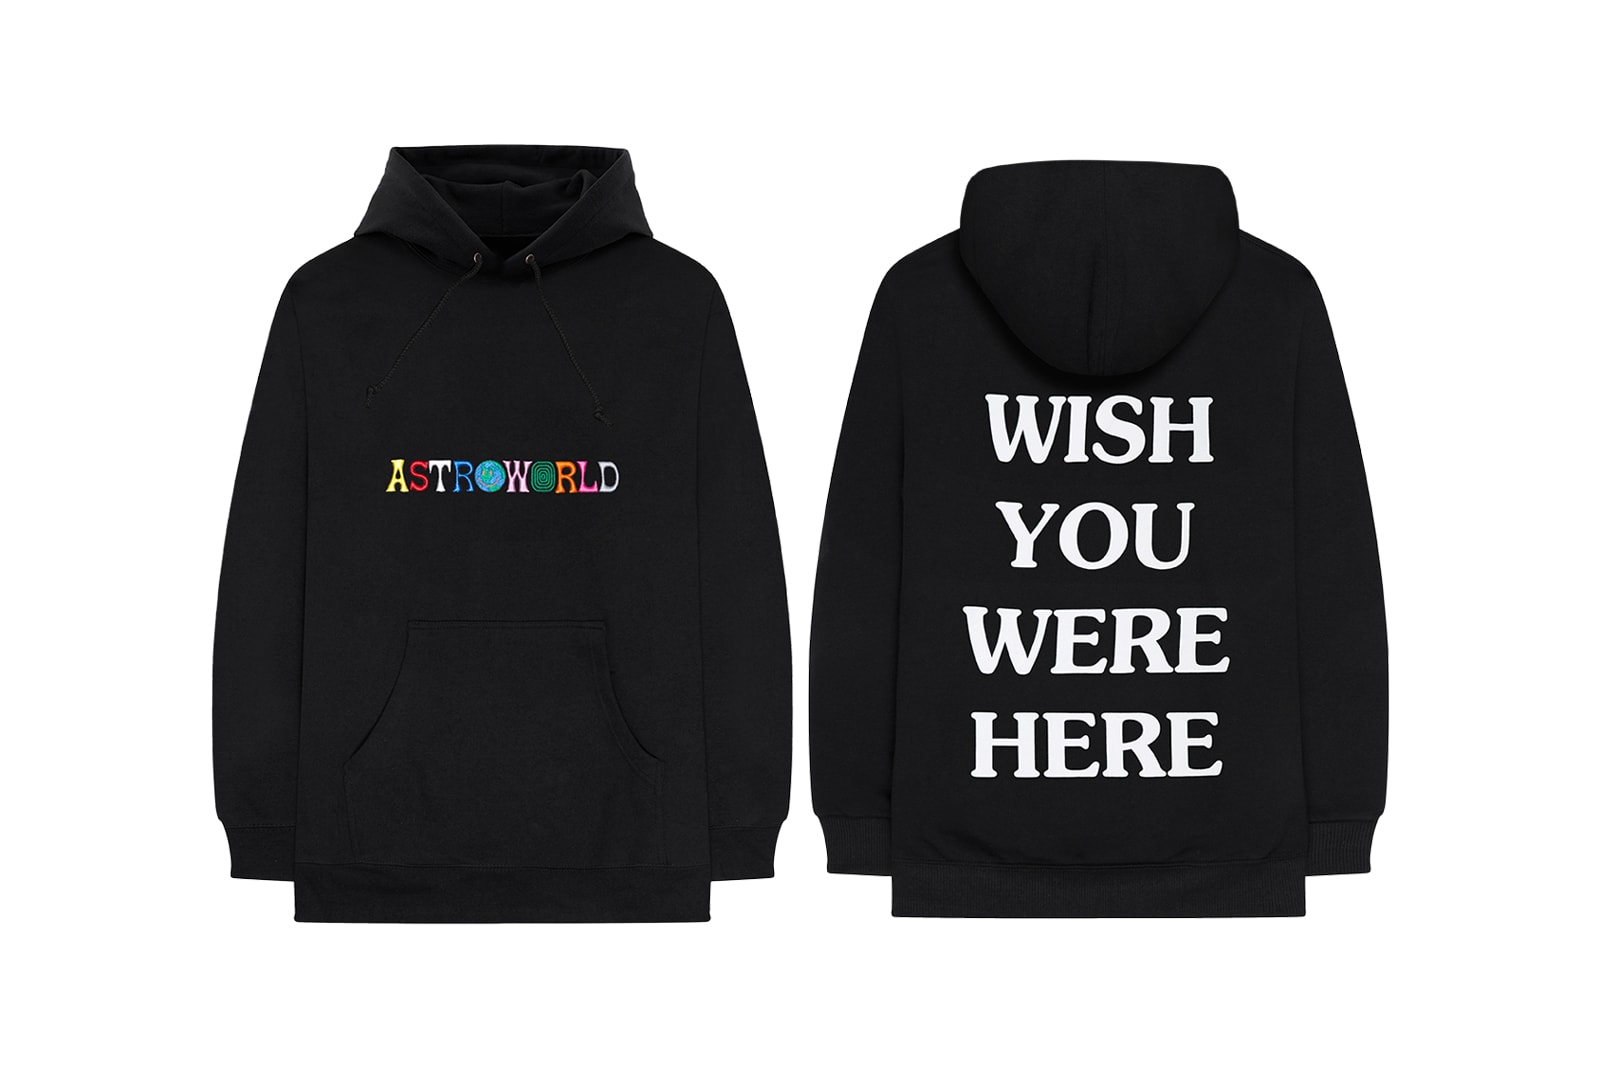 Travis Scott merchandise astroworld clothing collection limited edition web store buy purchase sale sell 24 hours 28 pieces branded exclusive ticket pre sale digital copy album august 1 10 2018 available launch premiere drop